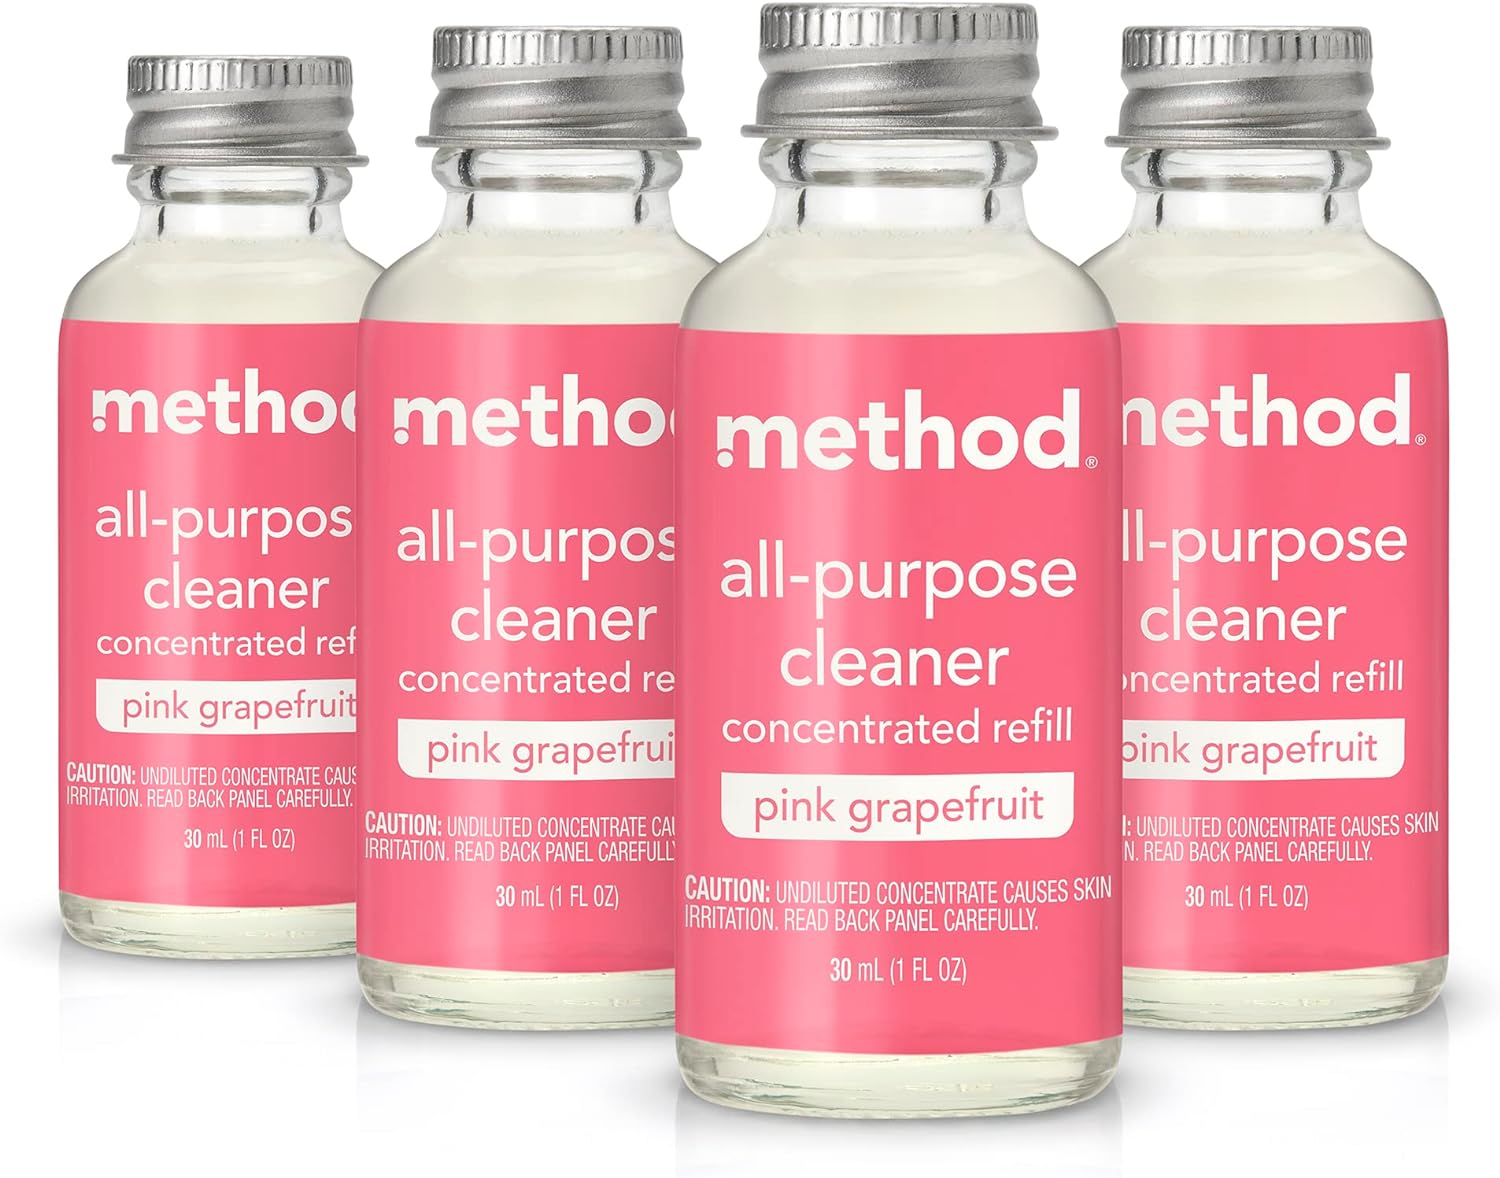 Method All-Purpose Cleaner Concentrates Refills, Pink Grapefruit, 4 Recyclable 1 fl oz Refills